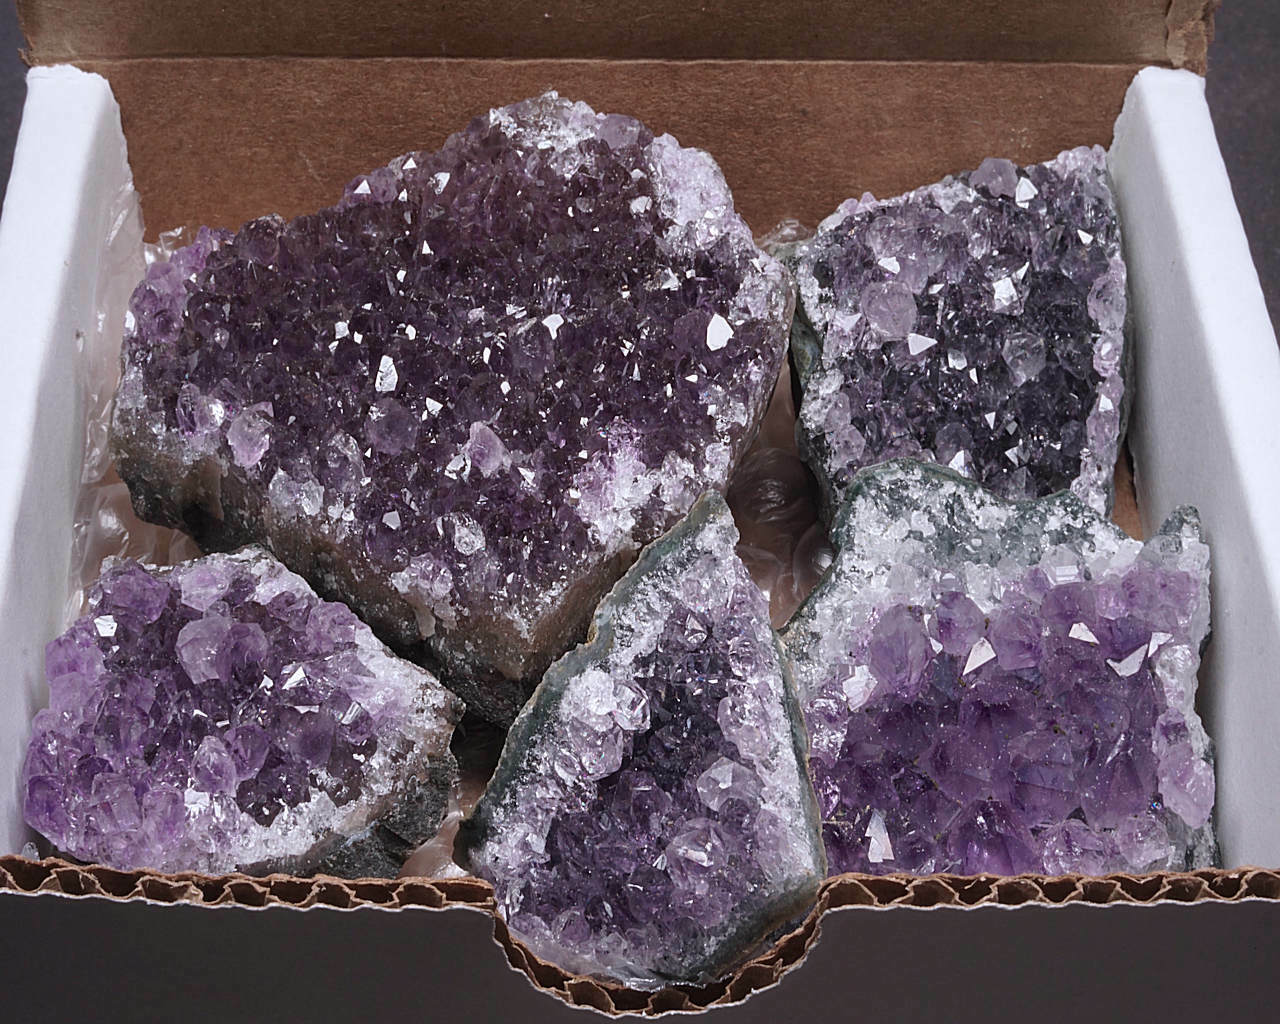 Amethyst Druzy Collection 1/2 LB 5-6 Purple Geode Specimens Crystals Points